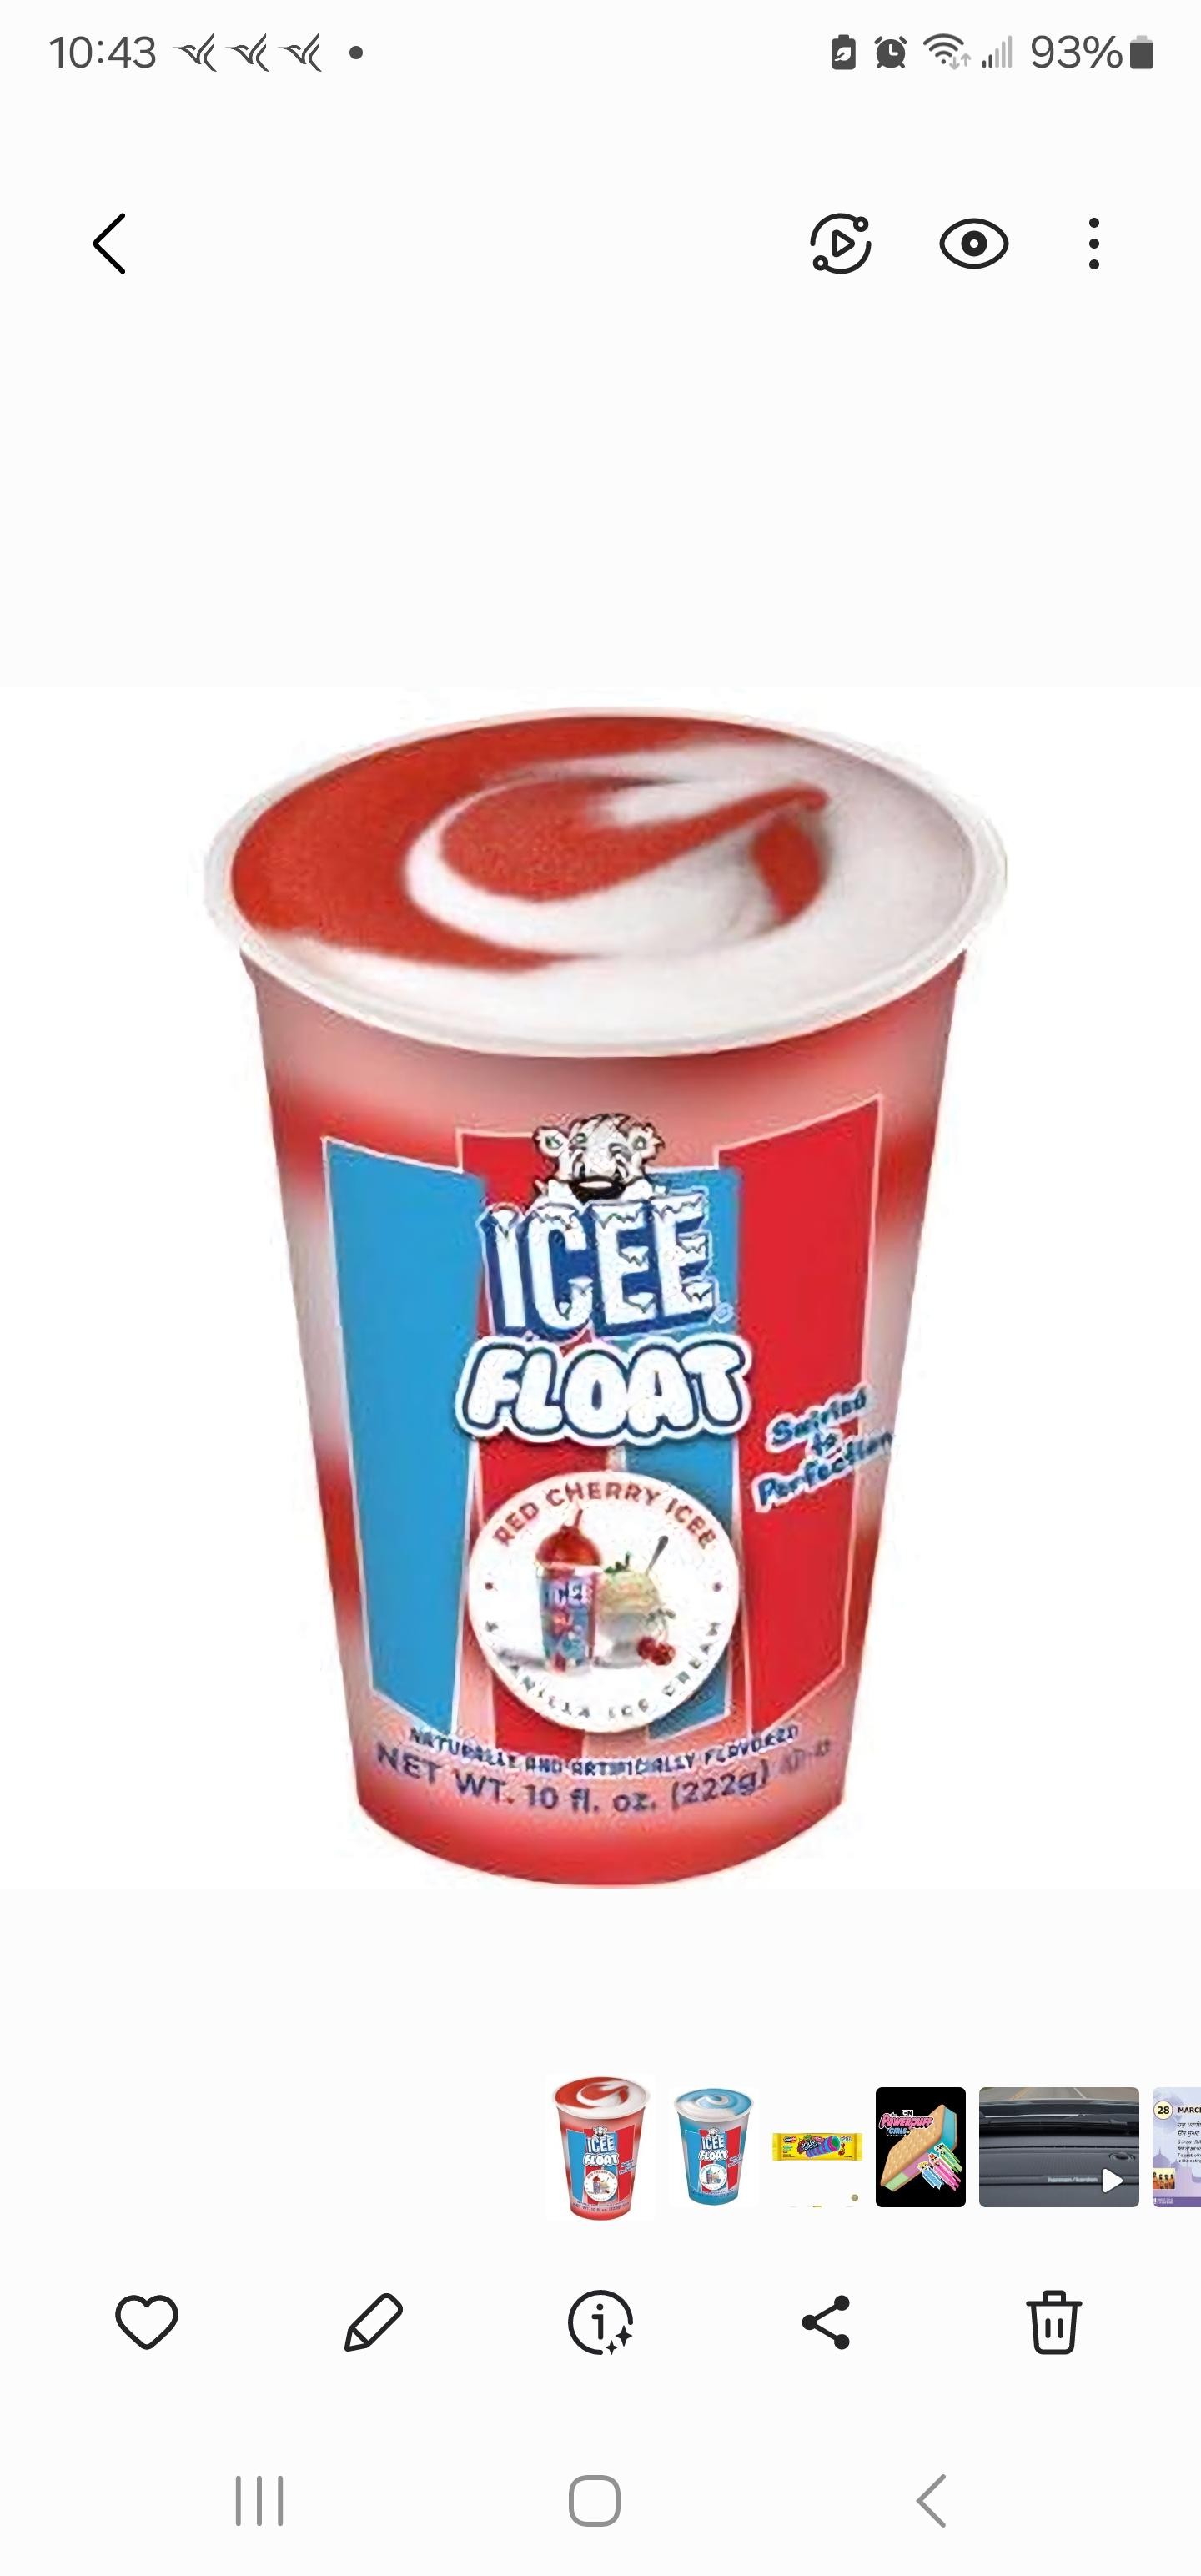 JJ Icee Float Cherry Cup